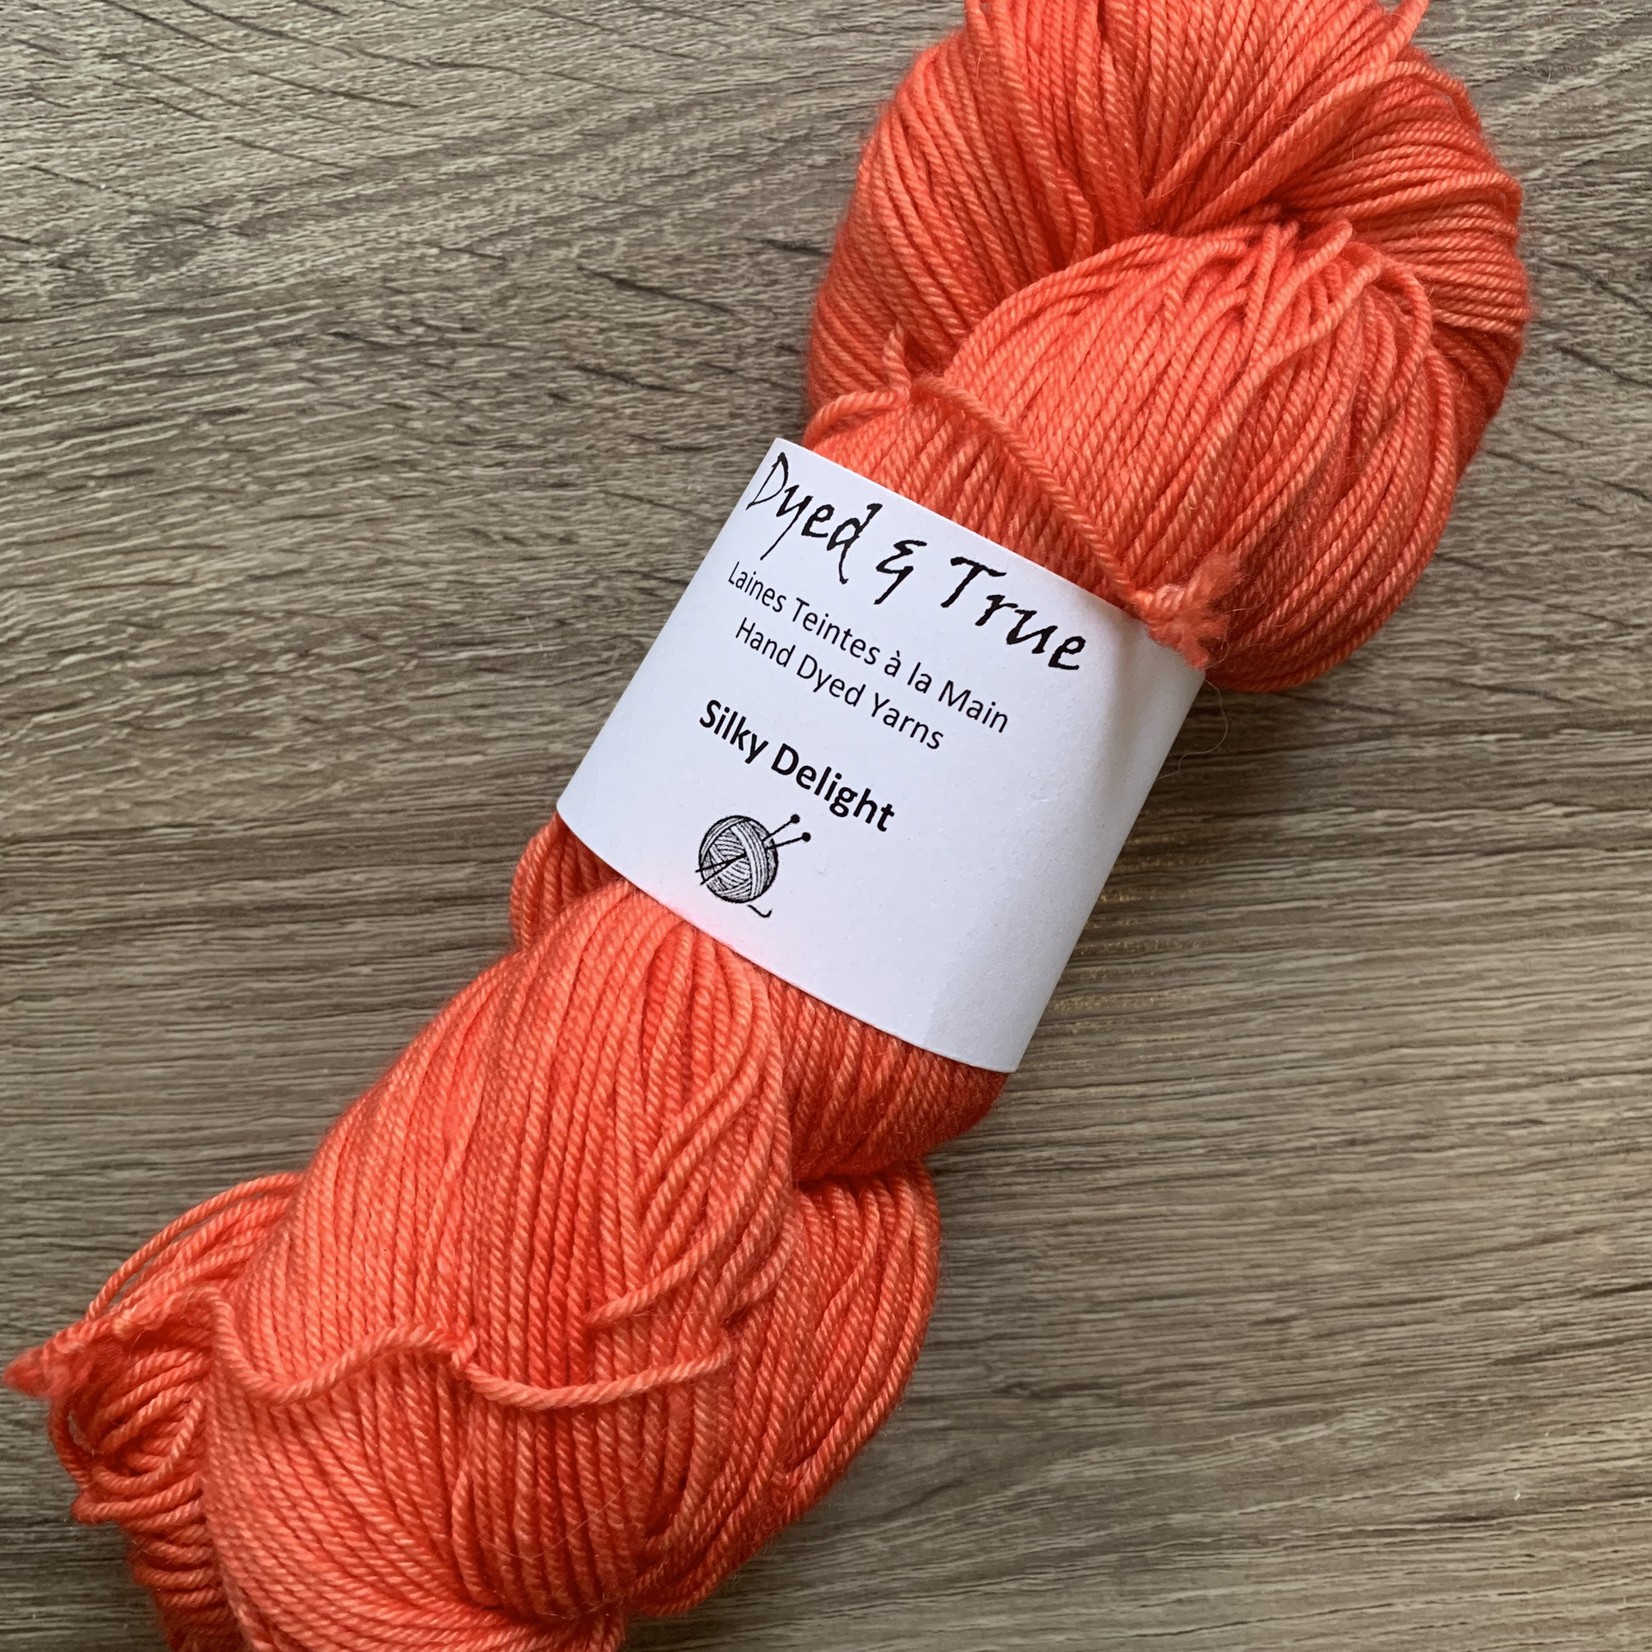 Dyed & True Dyed & True - Silky Delight